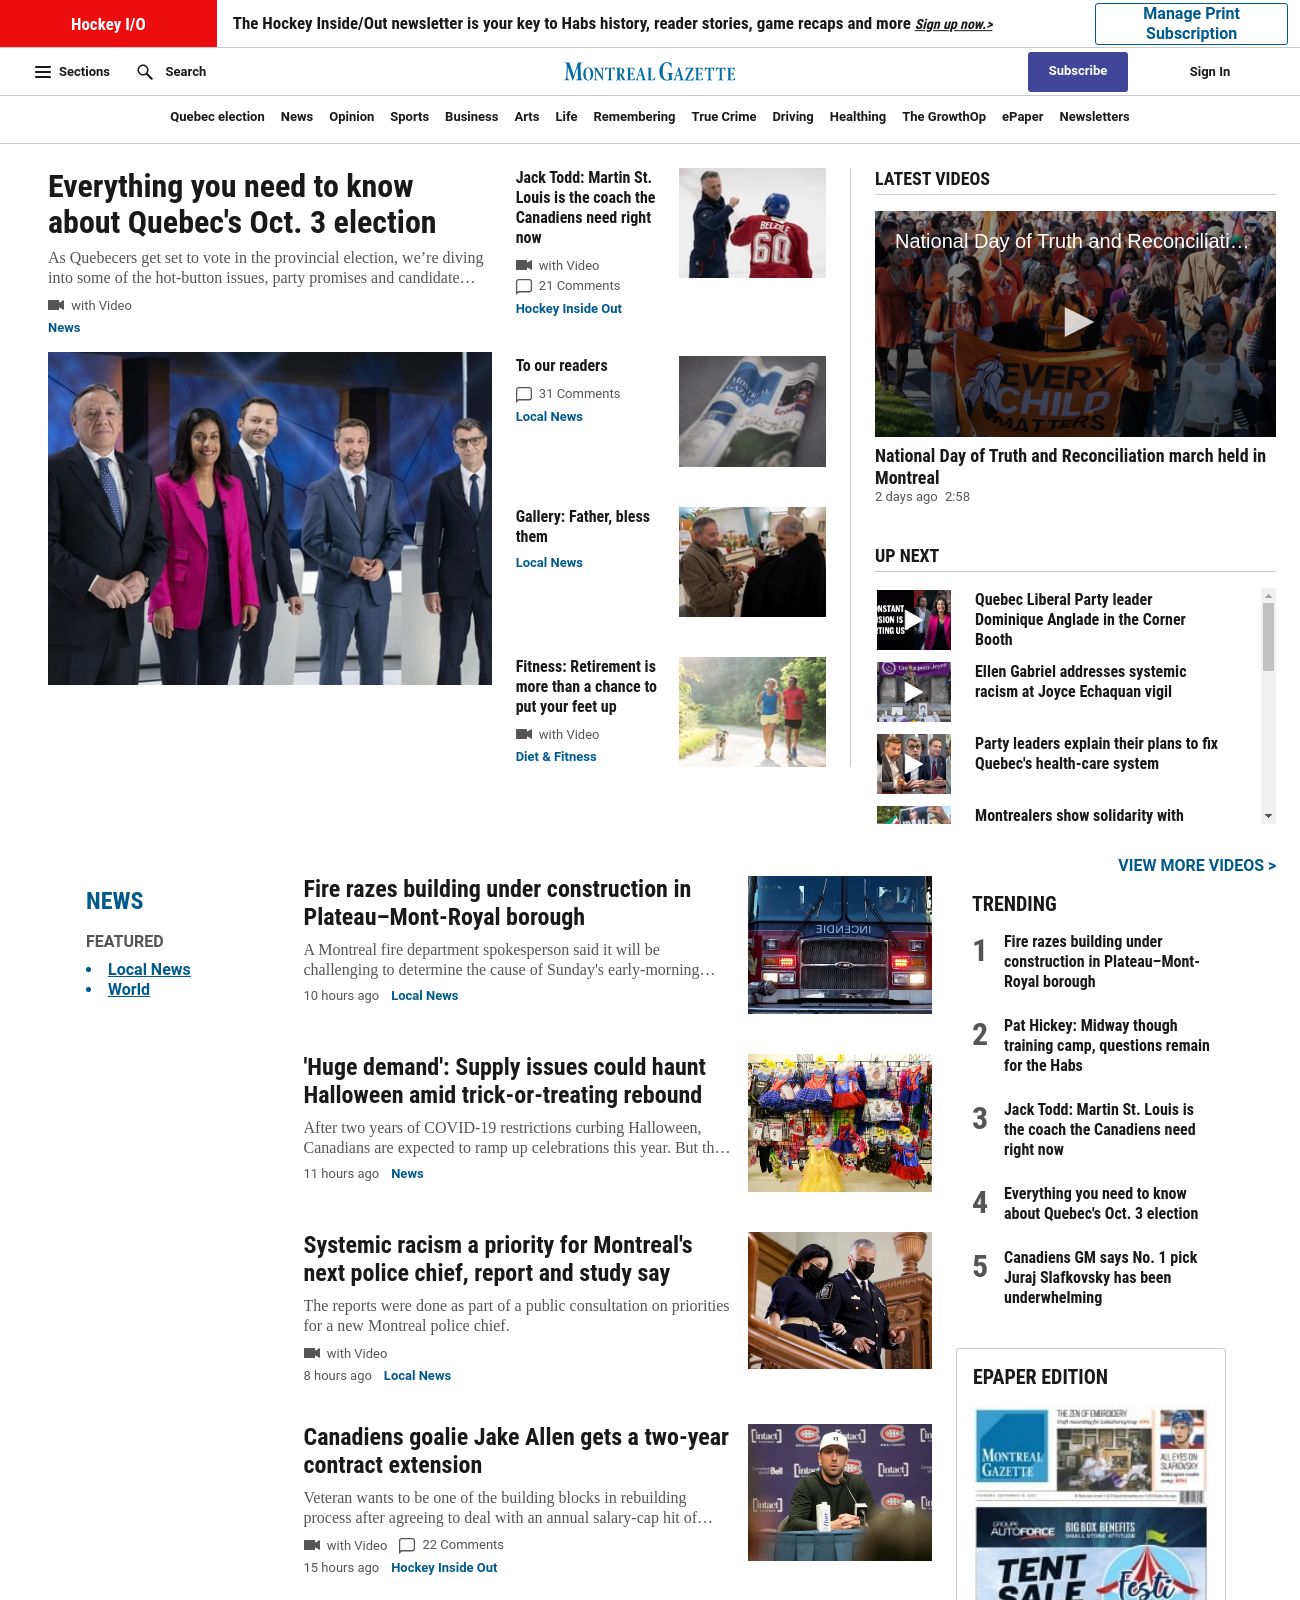 Montreal Gazette at 2022-10-03 01:14:21-04:00 local time